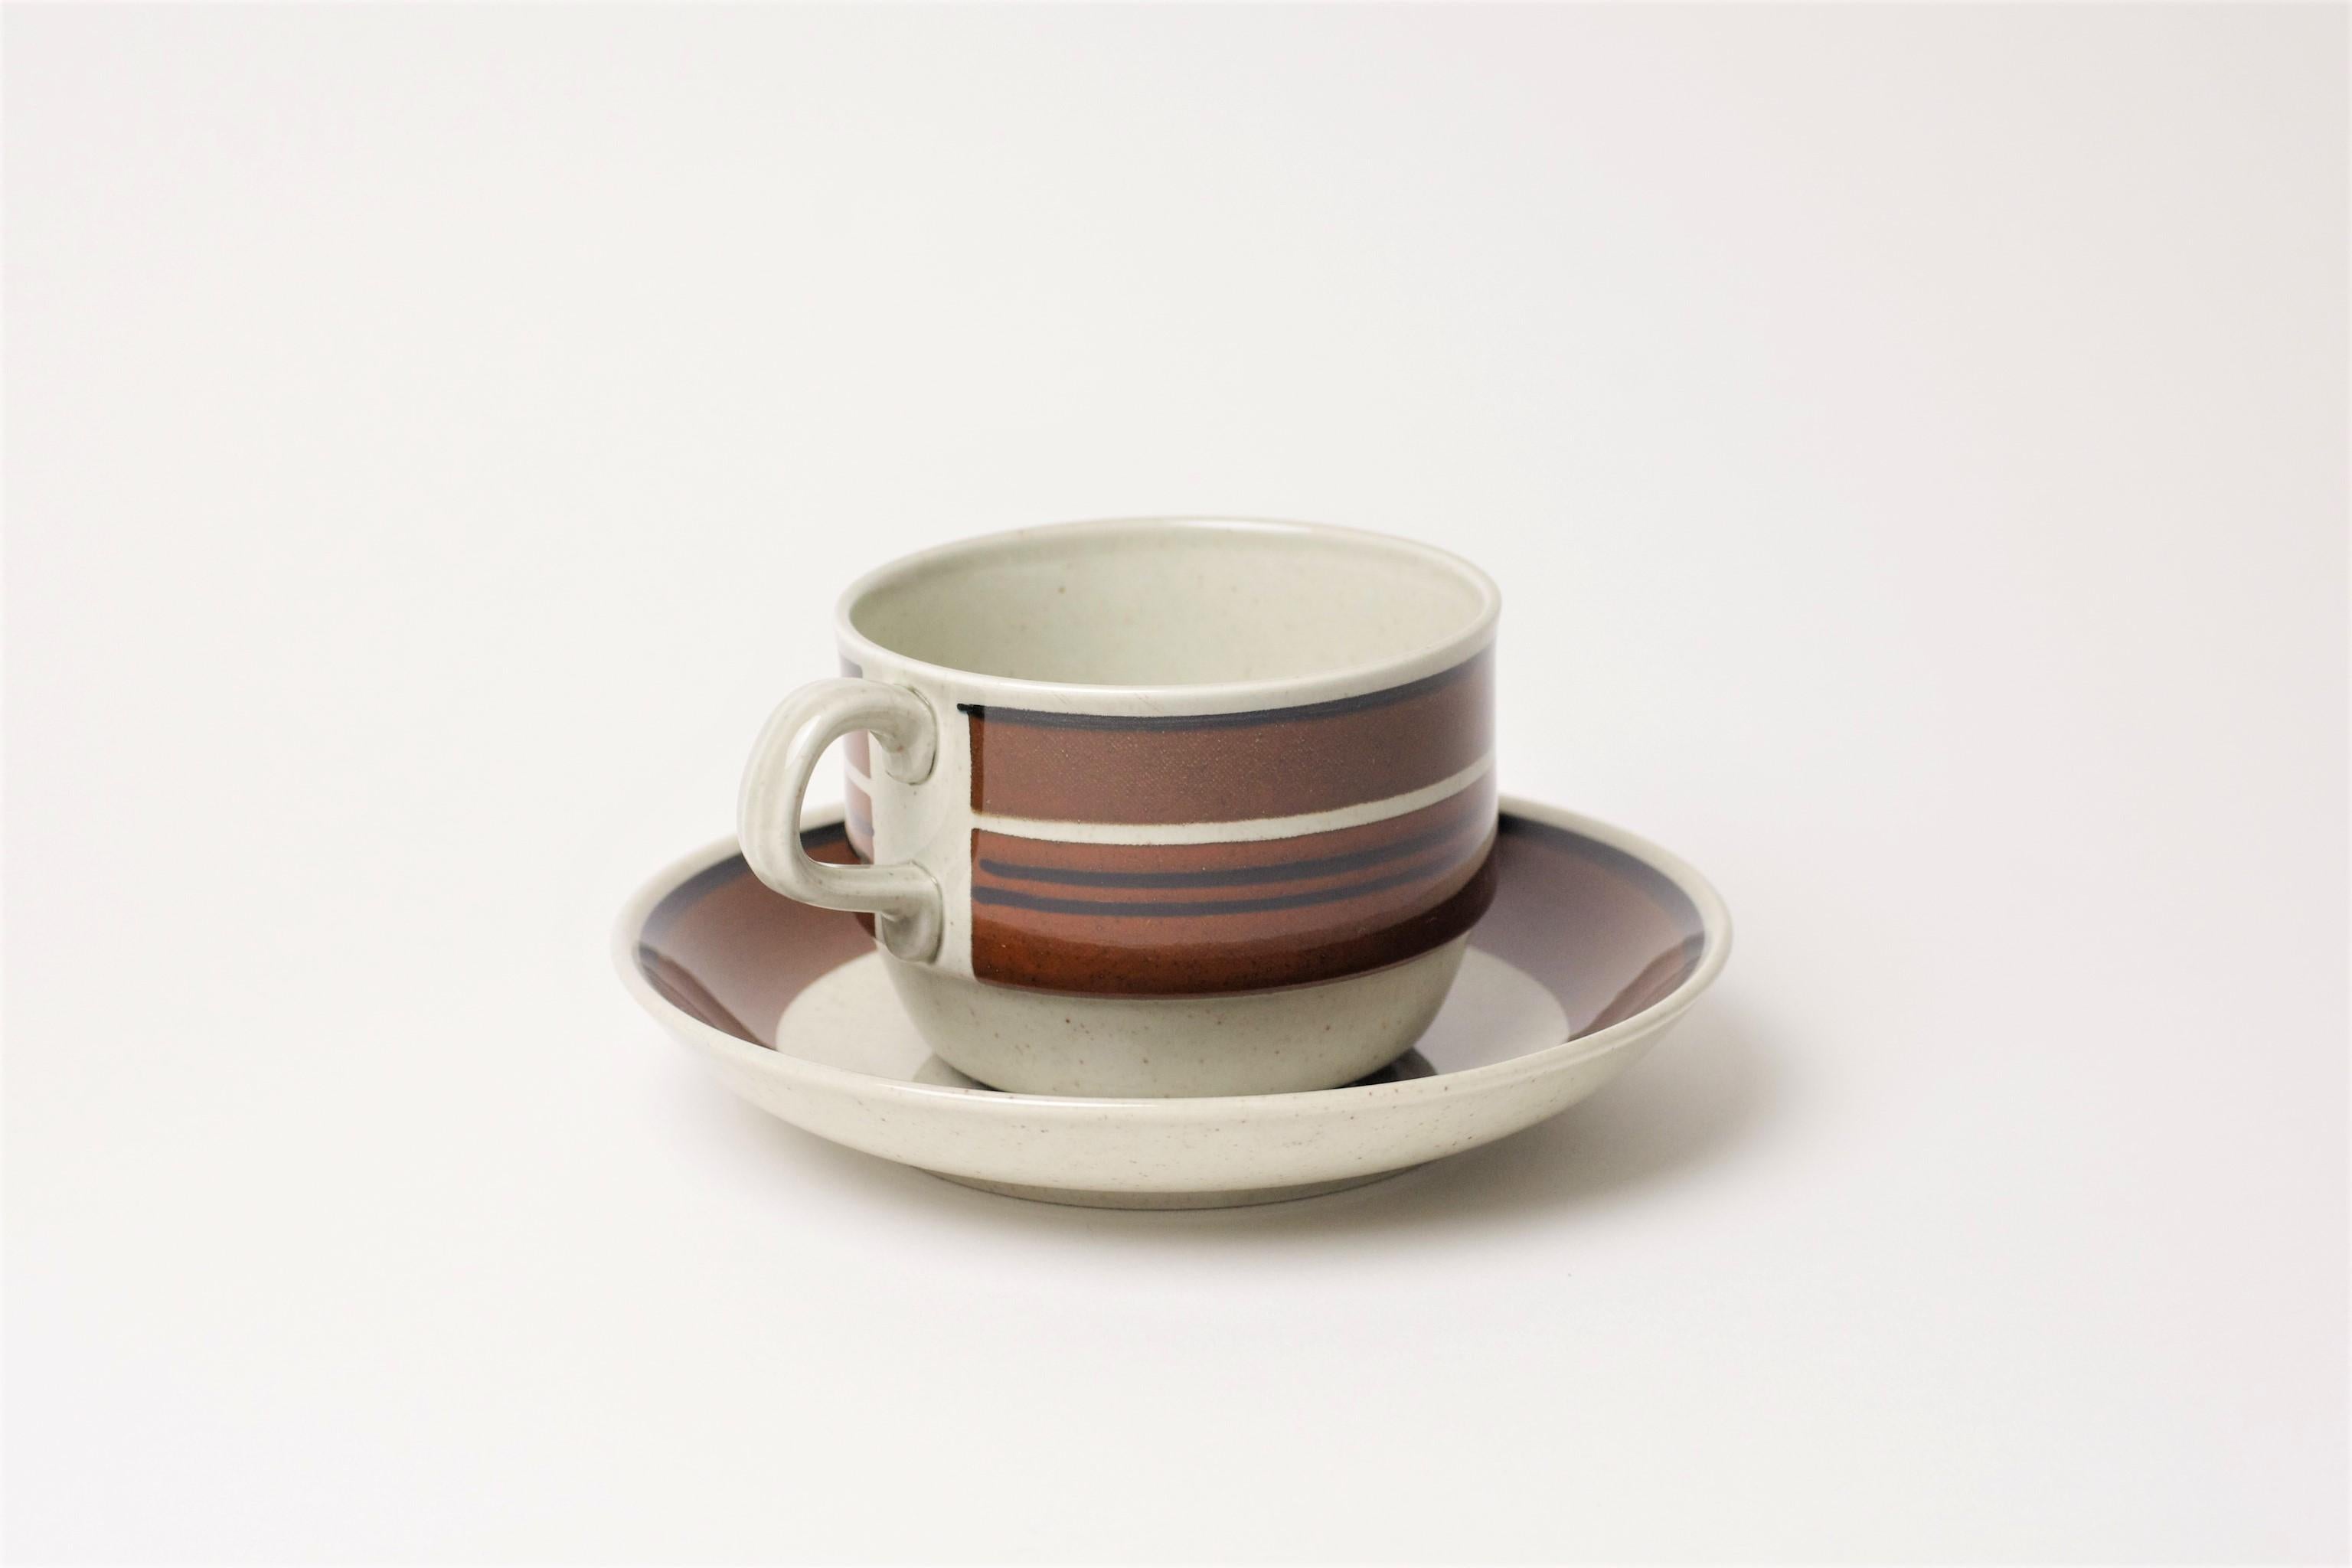 Product description:
The 10 cups and saucers on offer here are part of the Isolde series designed by Jacqueline Lind for Rörstrand. The design of the items is typical for the seventies. The main color of the items is light gray, the paint is